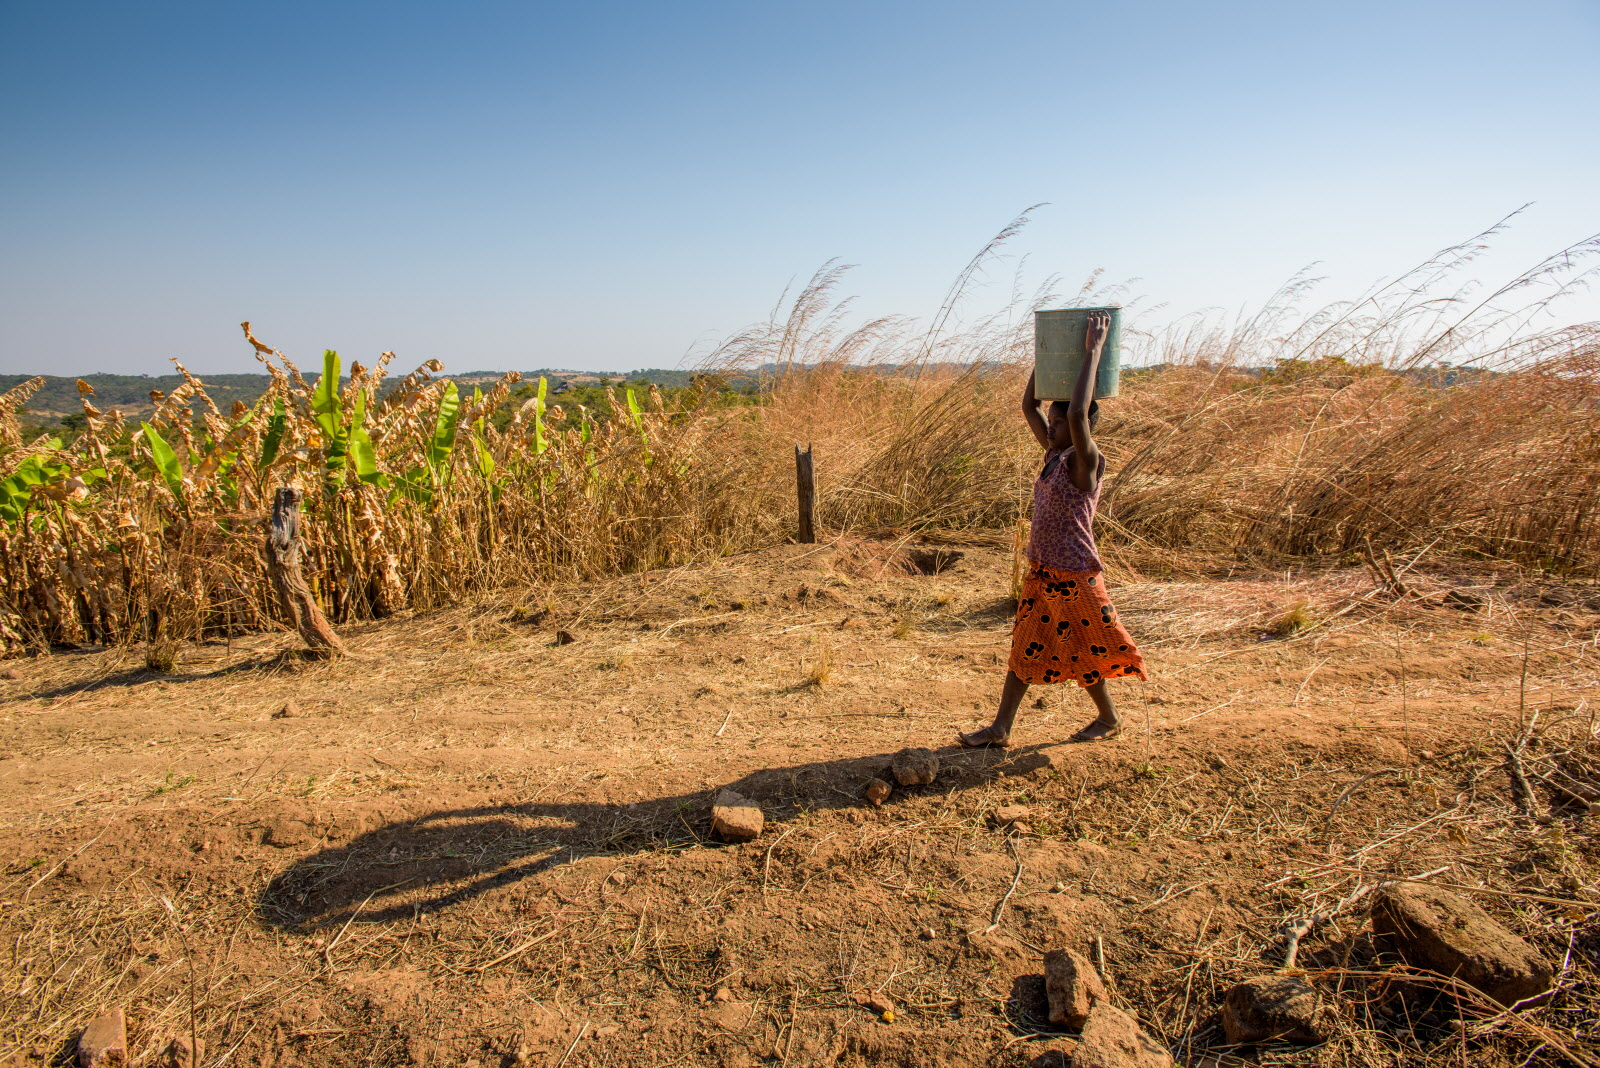 Though she fears being abducted and killed, 11-year-old Nivesh fetches water from a stream in southern Zambia three times a day to keep her family alive.